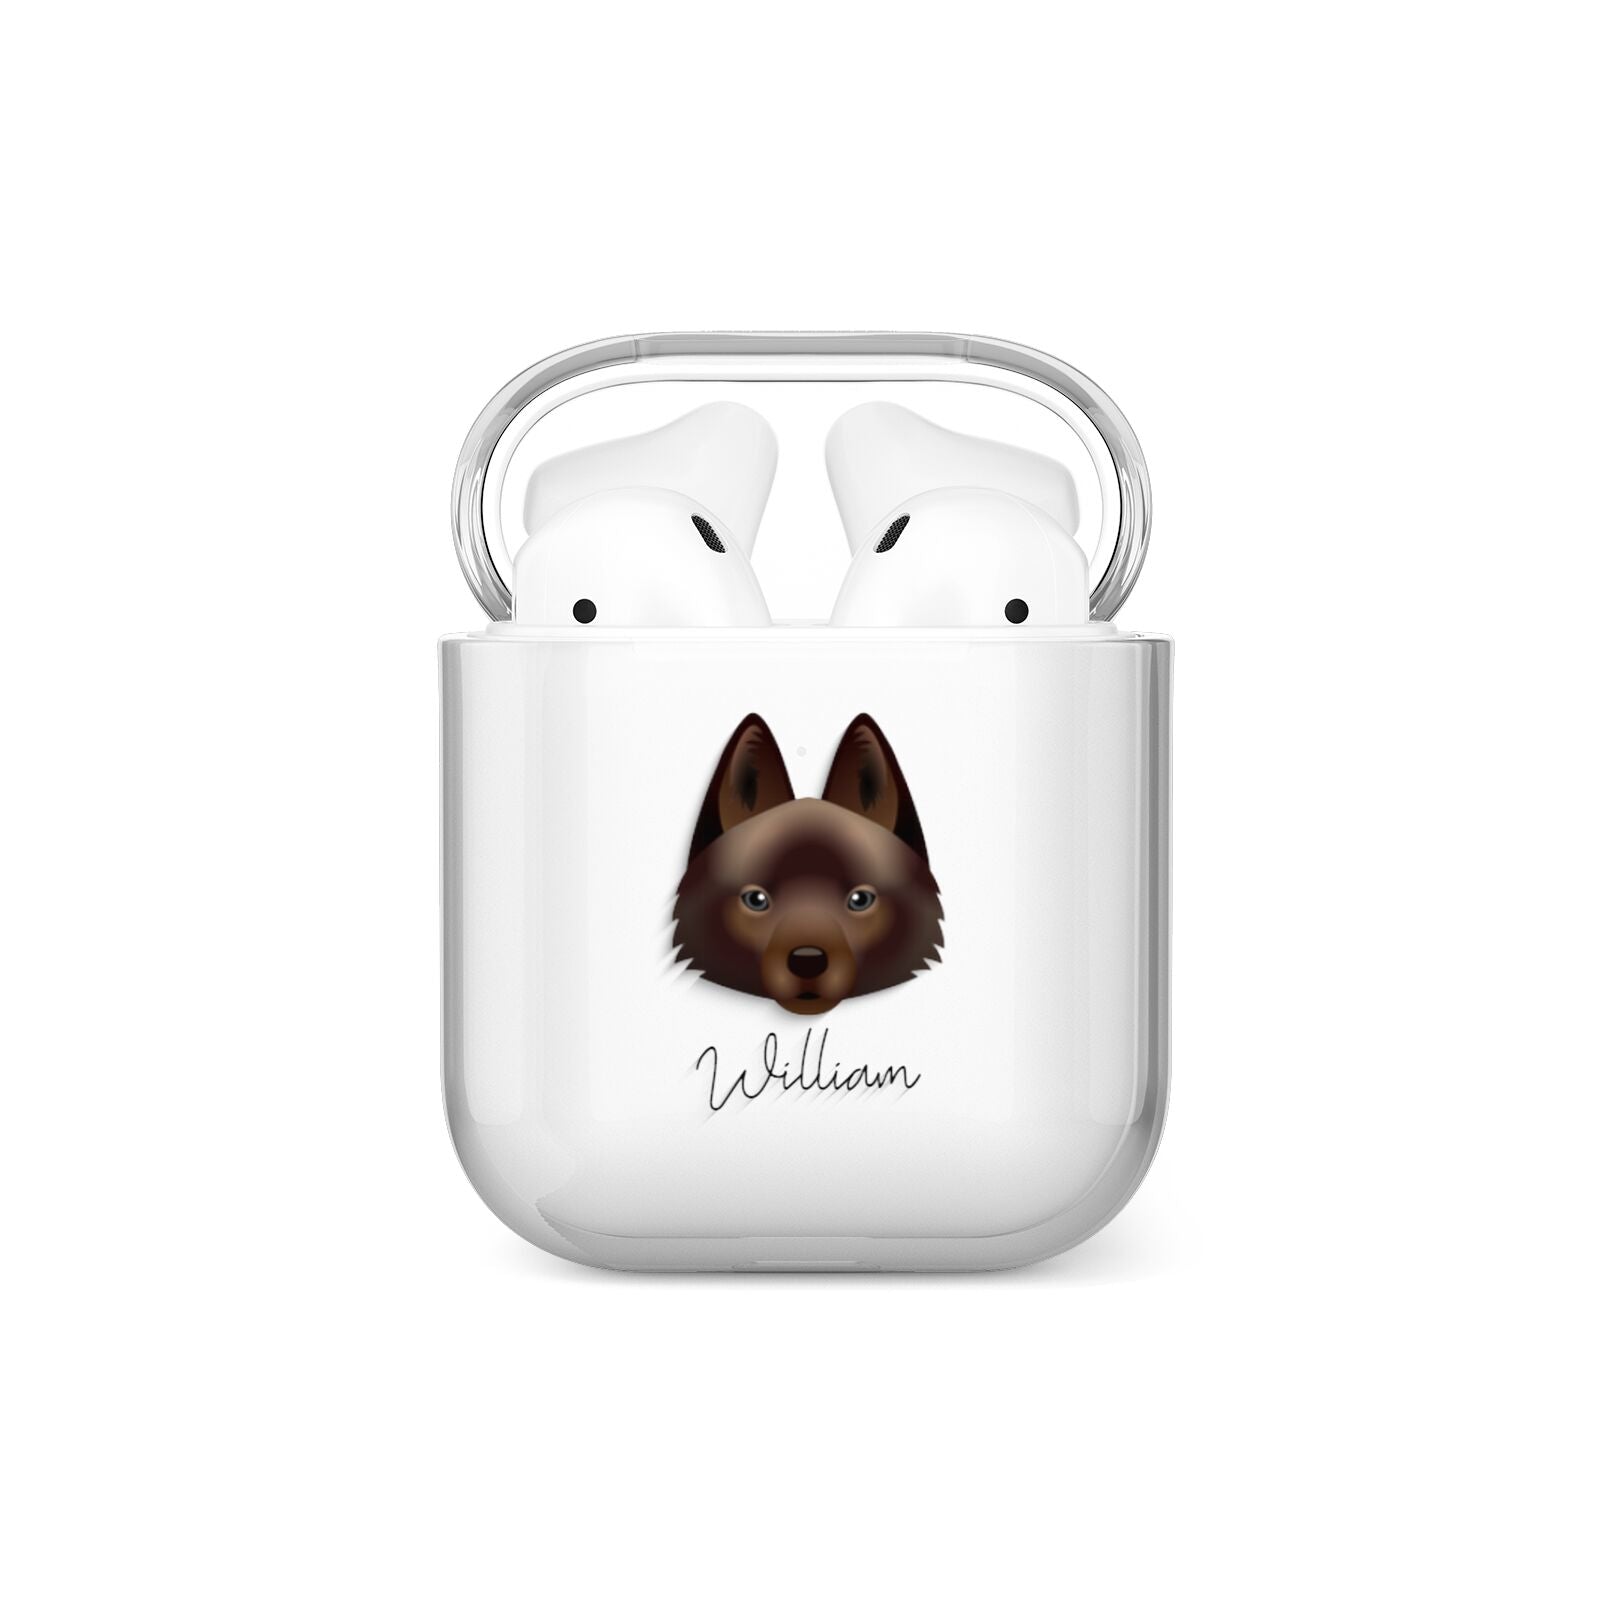 Schipperke Personalised AirPods Case